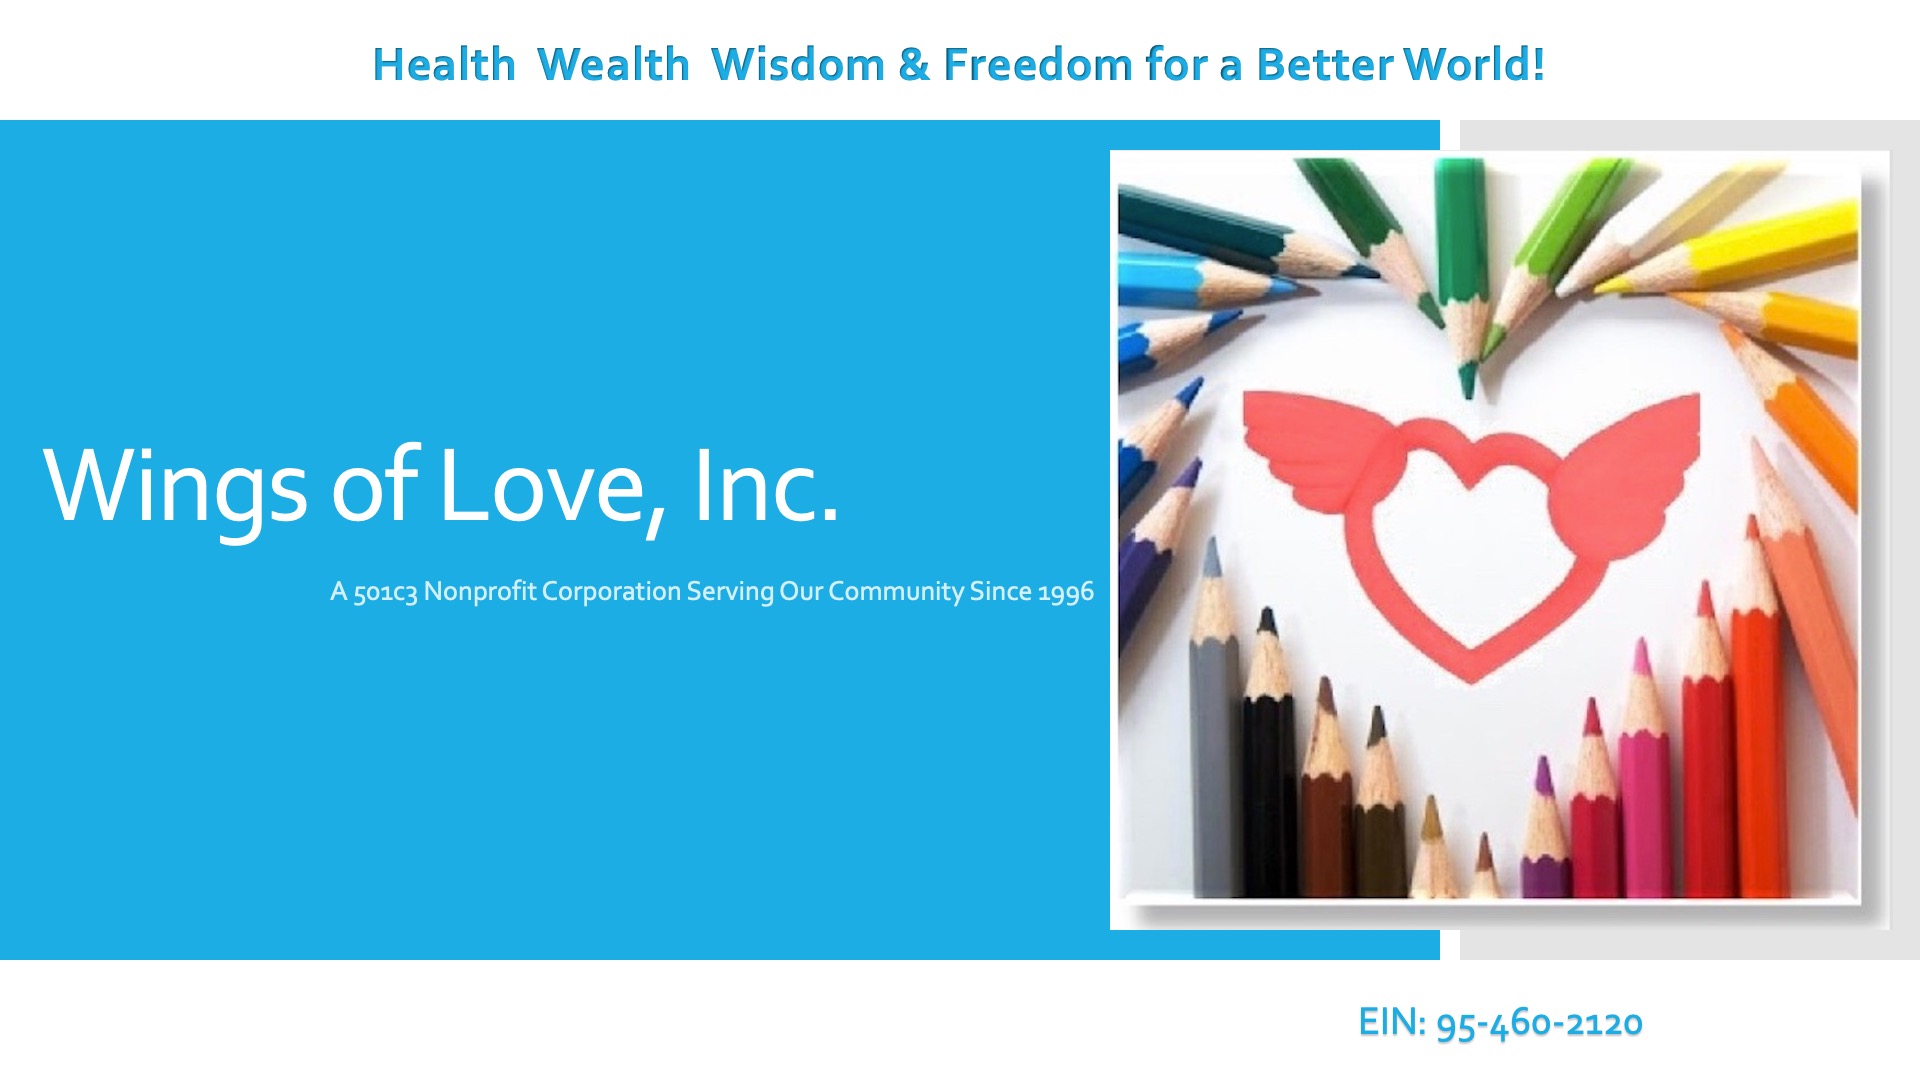 Wings of Love, Awarded with the GuideStar Gold Seal of Transparency